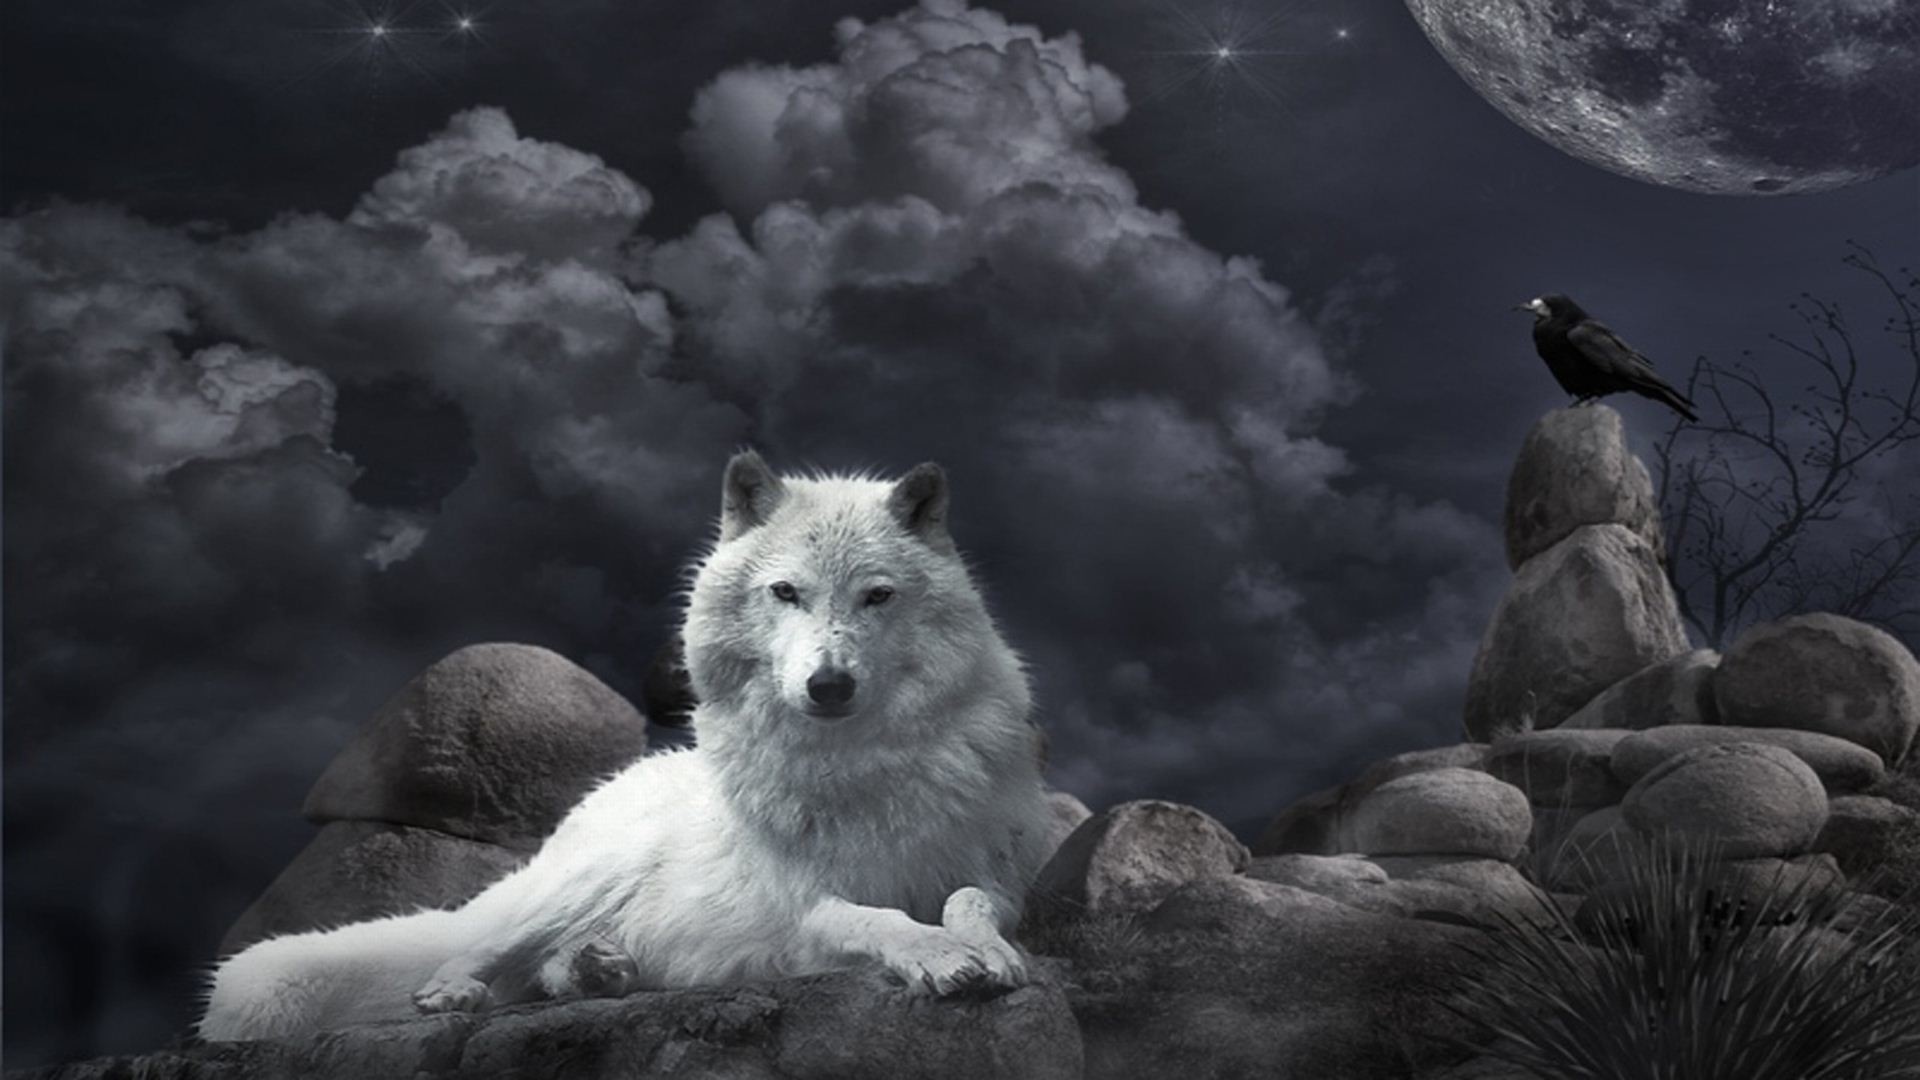 1920x1080 http://www.freehdimages.in/uploads/large/desktop-pics-of-a-baby-wolf- wallpaper.jpg | wolf | Pinterest | Wolf wallpaper, Fantasy wolf and  Wallpaper